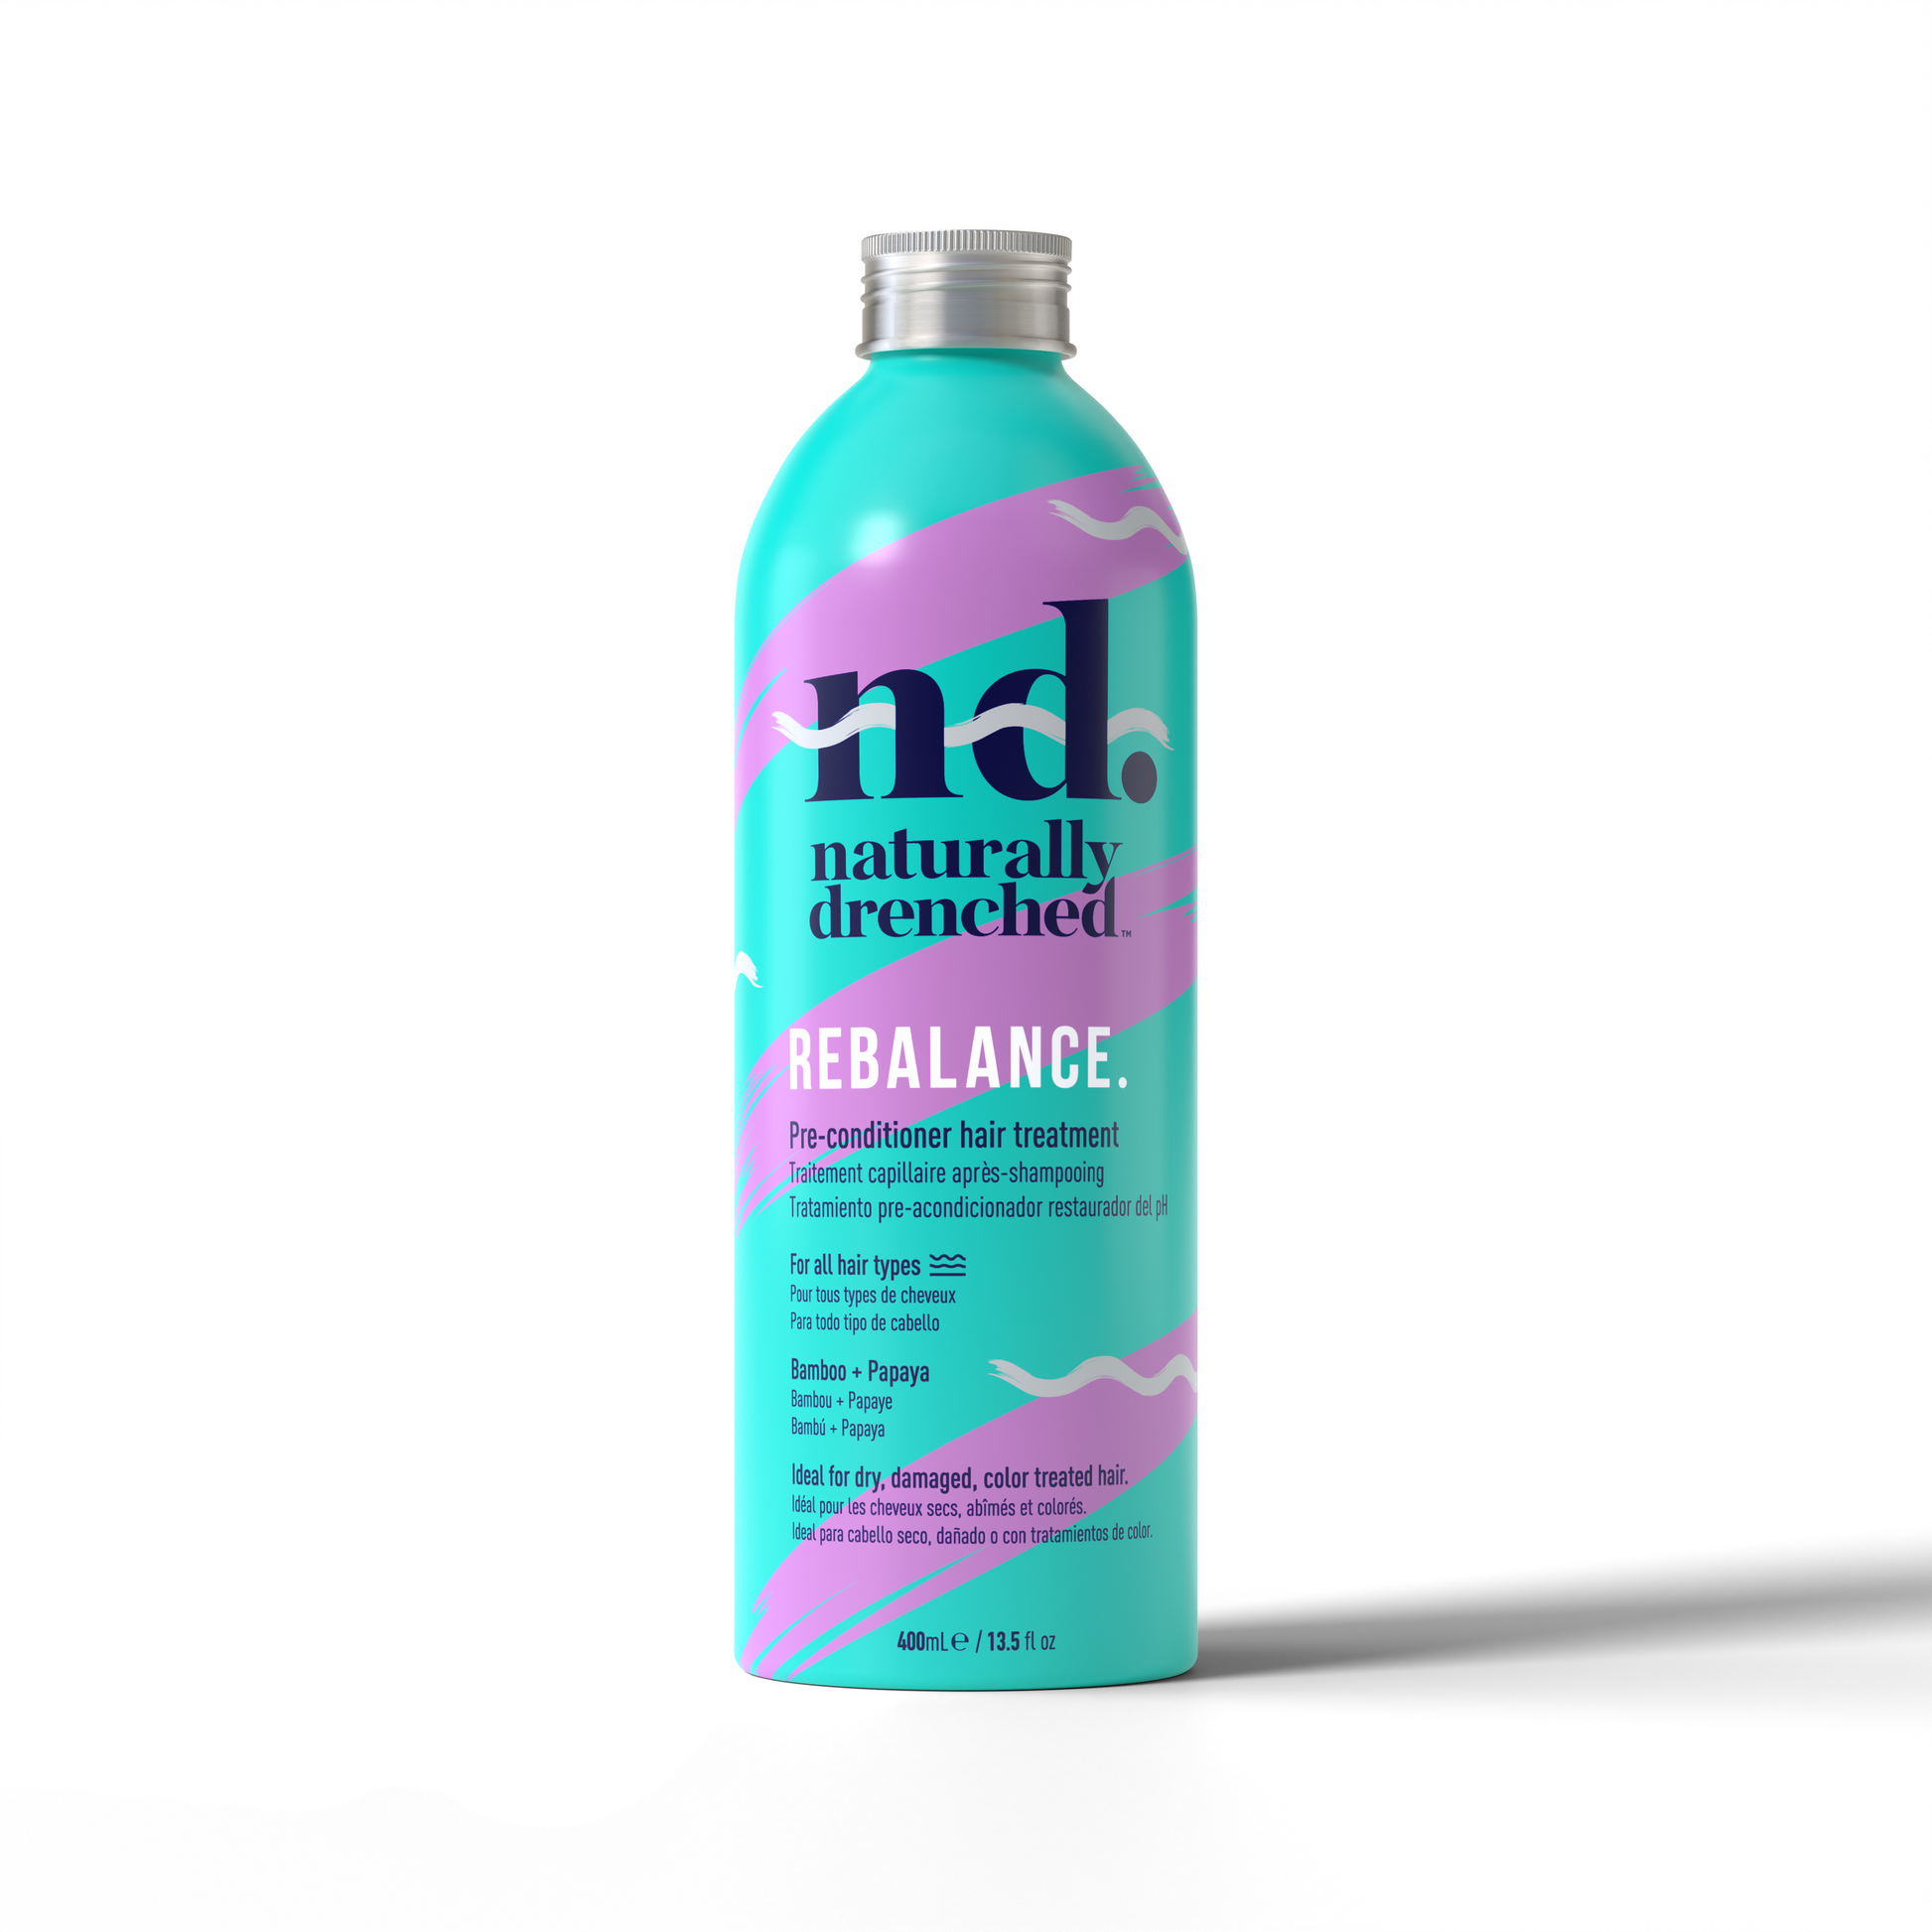 Rebalance Pre-Conditioner Treatment - Naturally Drenched